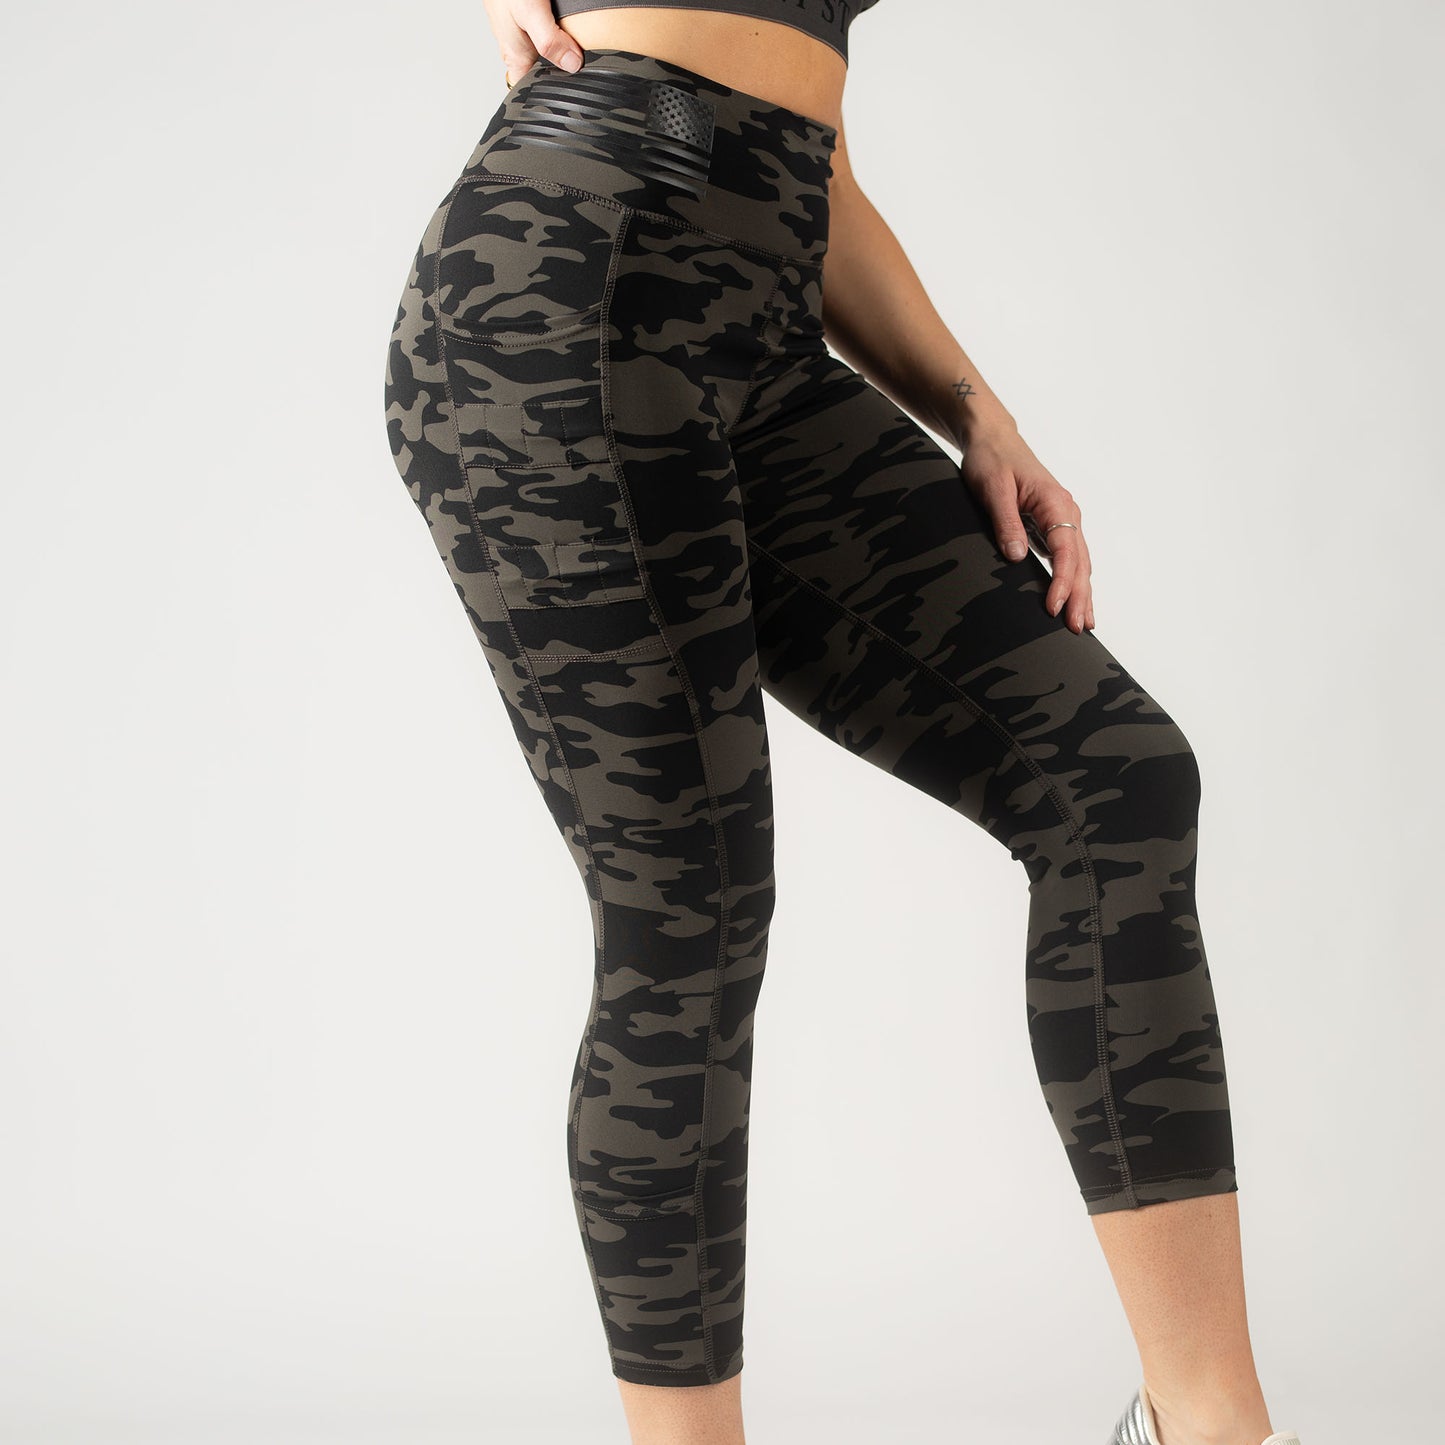 Work Out Clothing for Women 